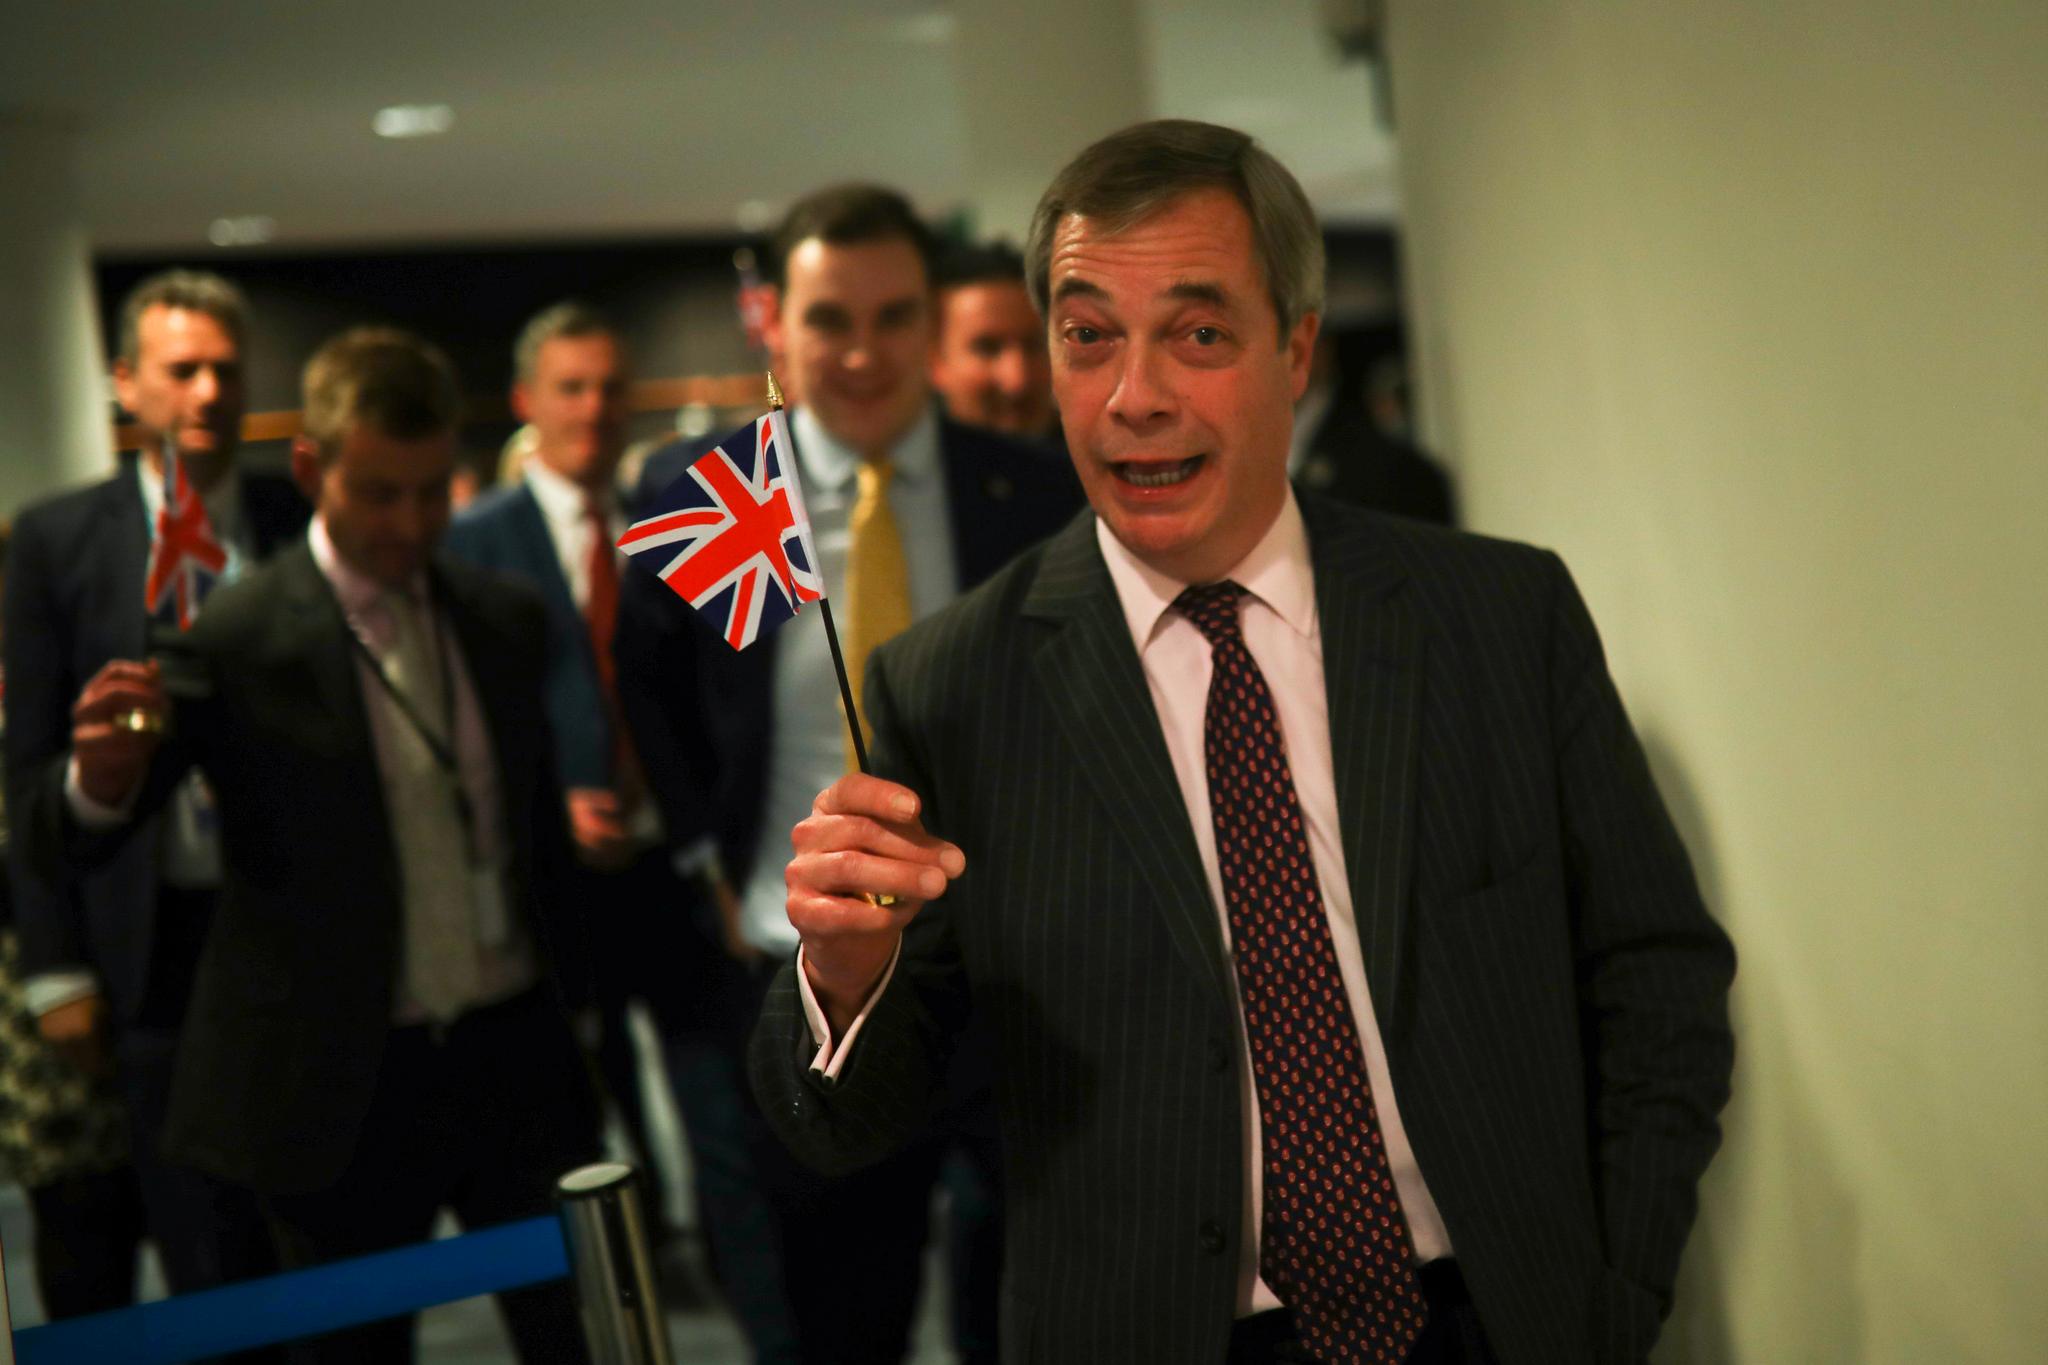 He is the face of Brexit.  Now Nigel Farage says he may want to move out of the country.